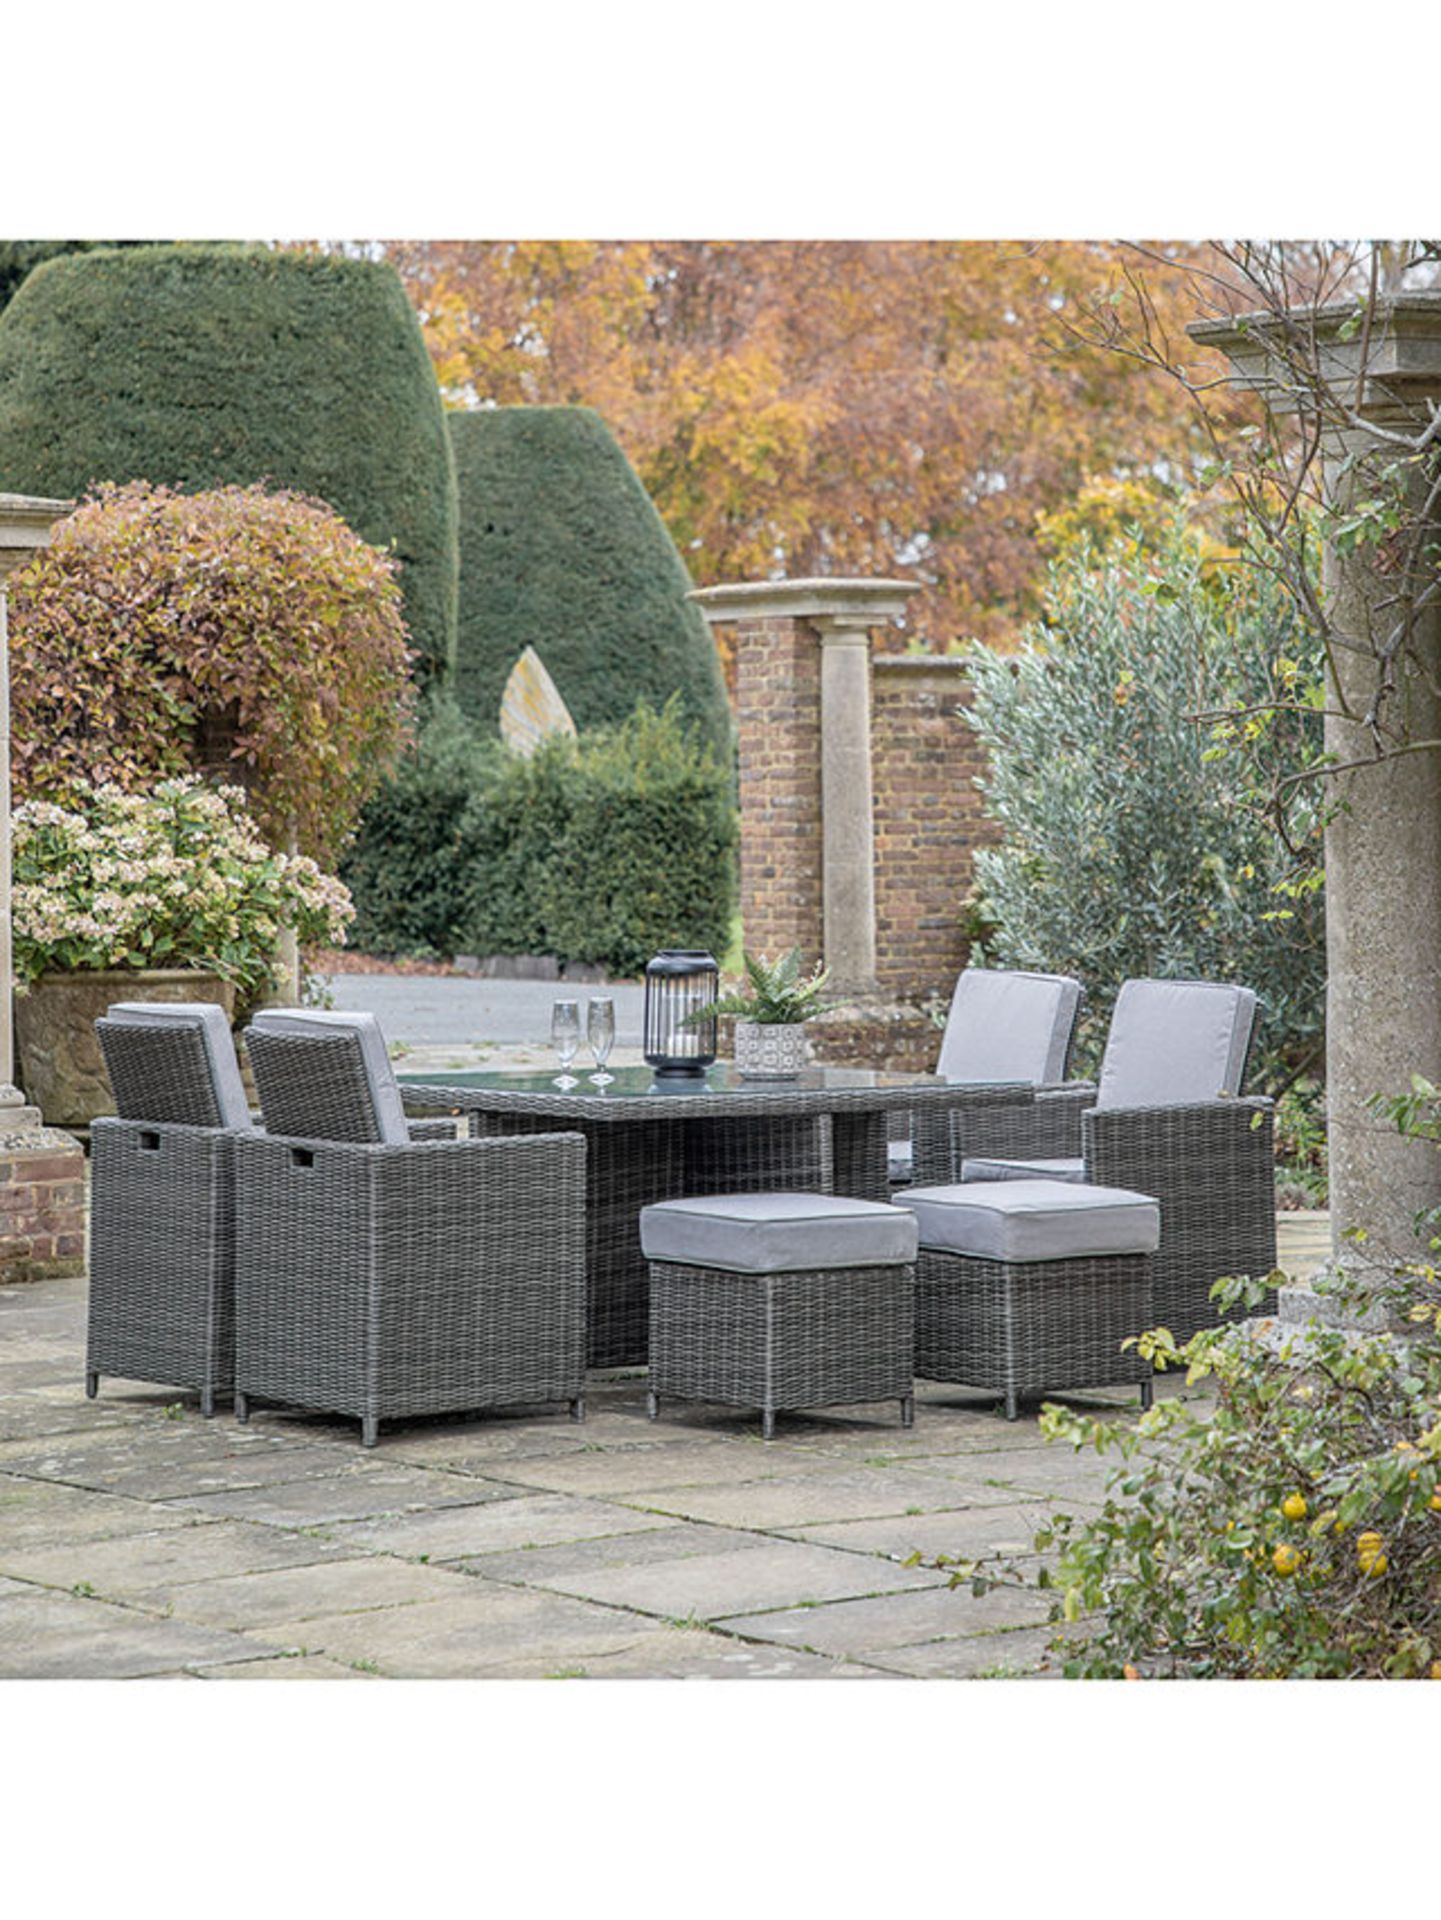 John Lewis Adford 8-Seater Height Adjust Cube Garden Dining Table & Chairs Set, Grey - PRICED £2,200